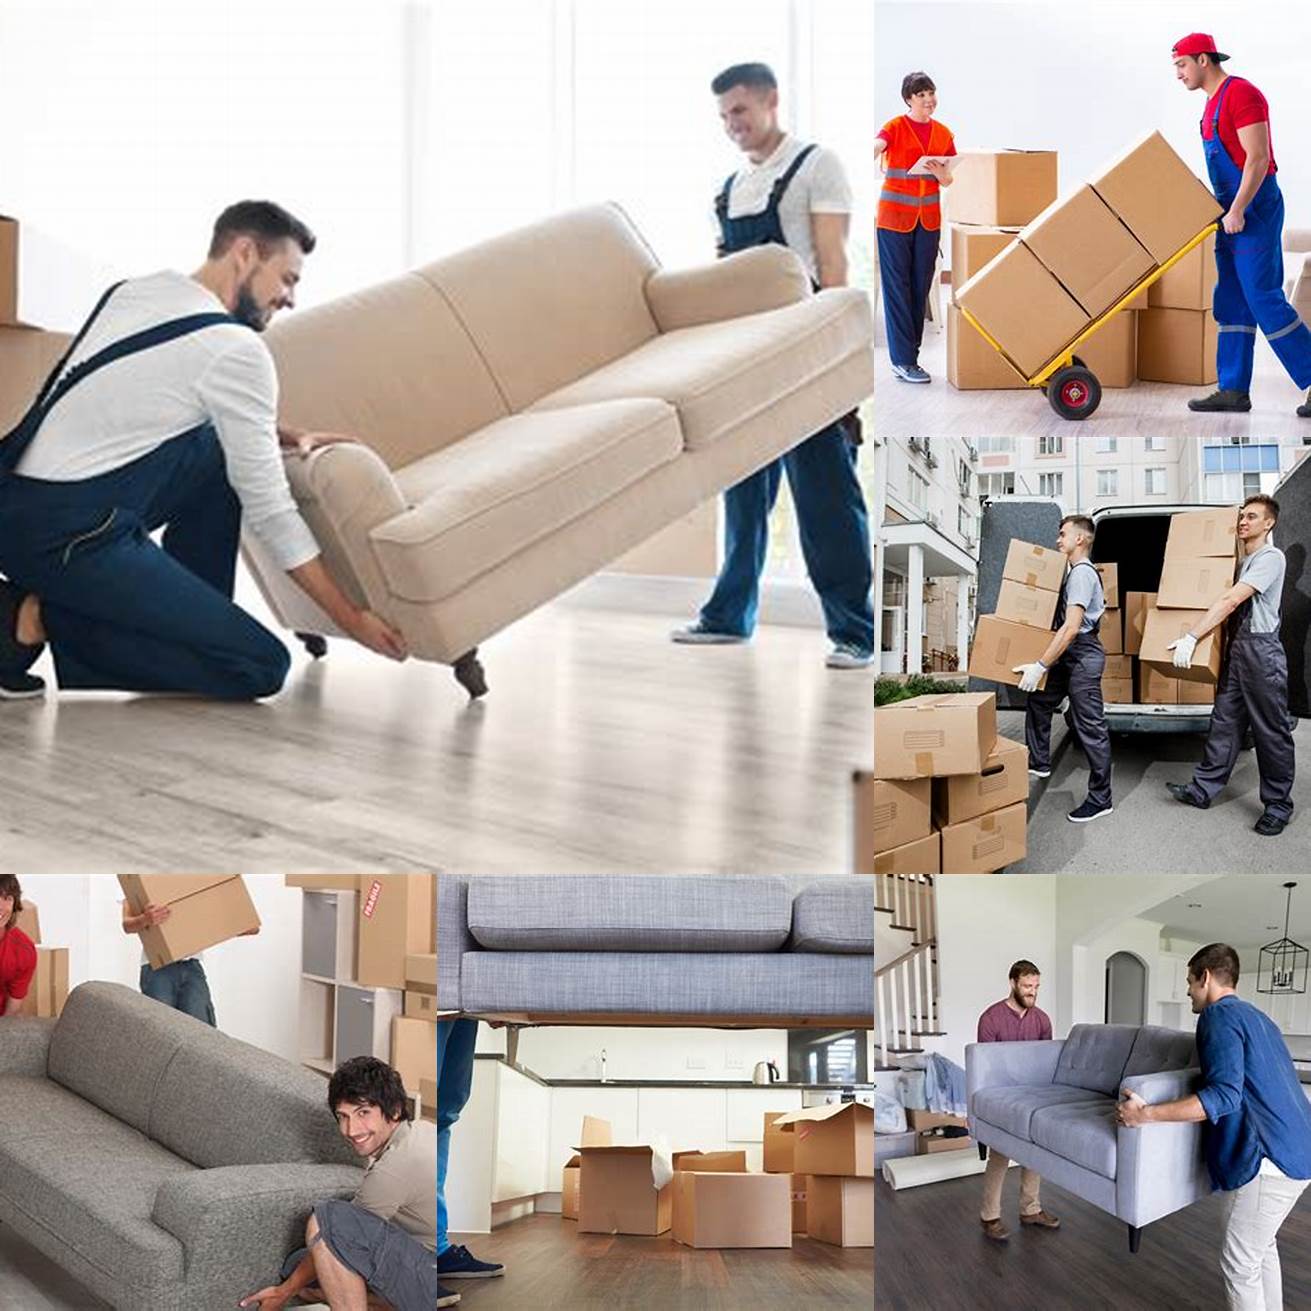 Image of professional movers carrying furniture